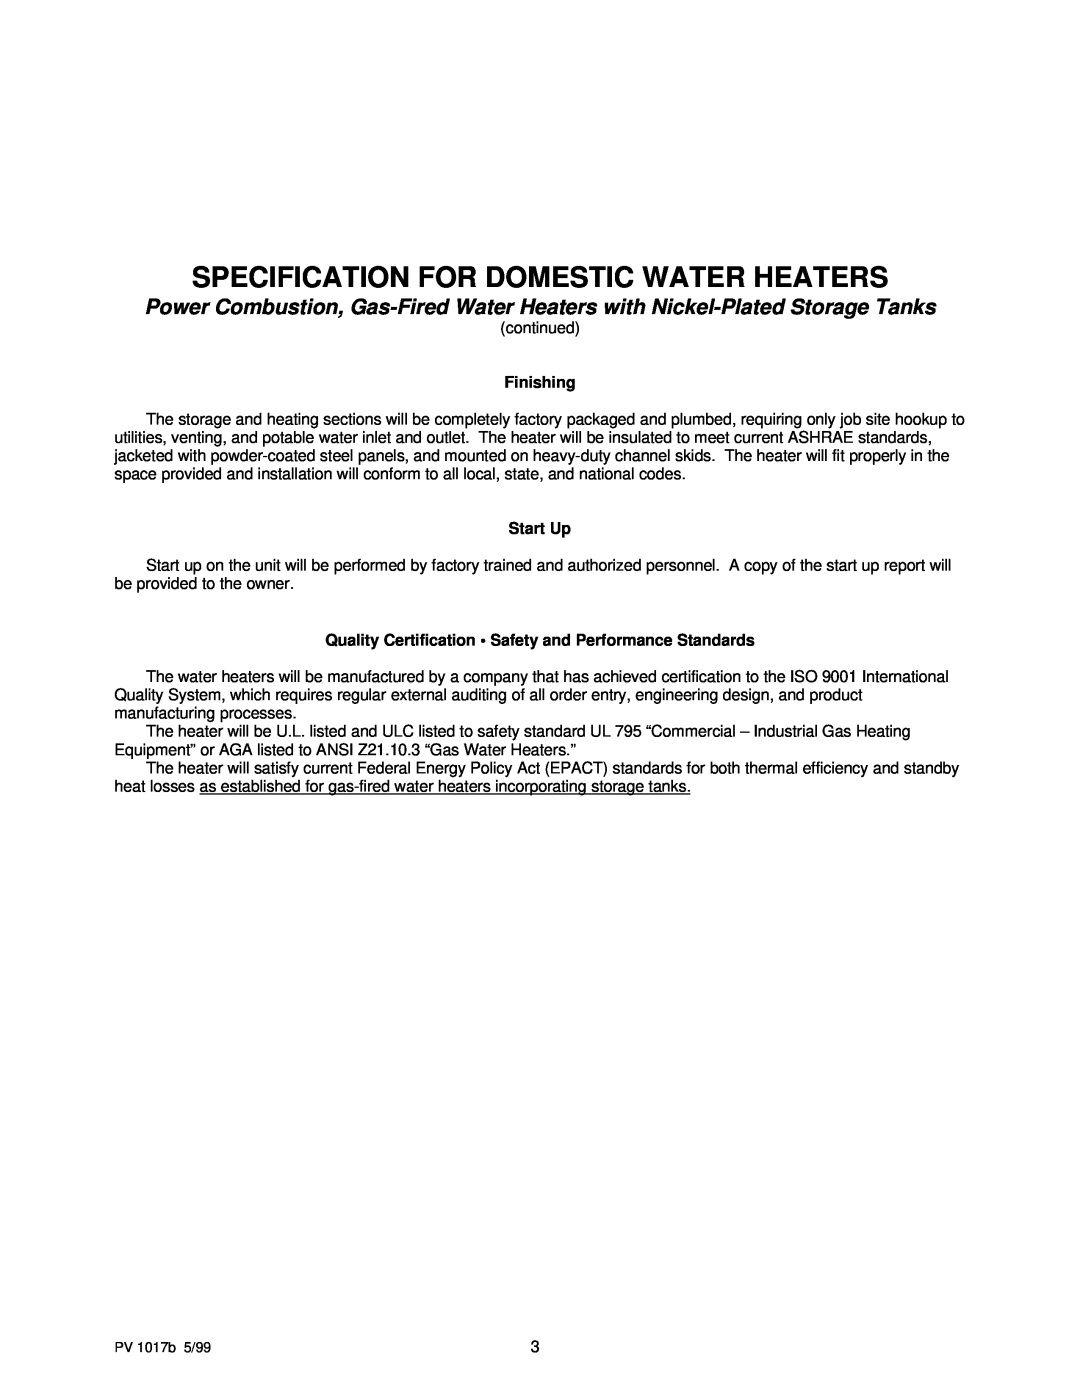 PVI Industries manual Specification For Domestic Water Heaters, Finishing, Start Up 